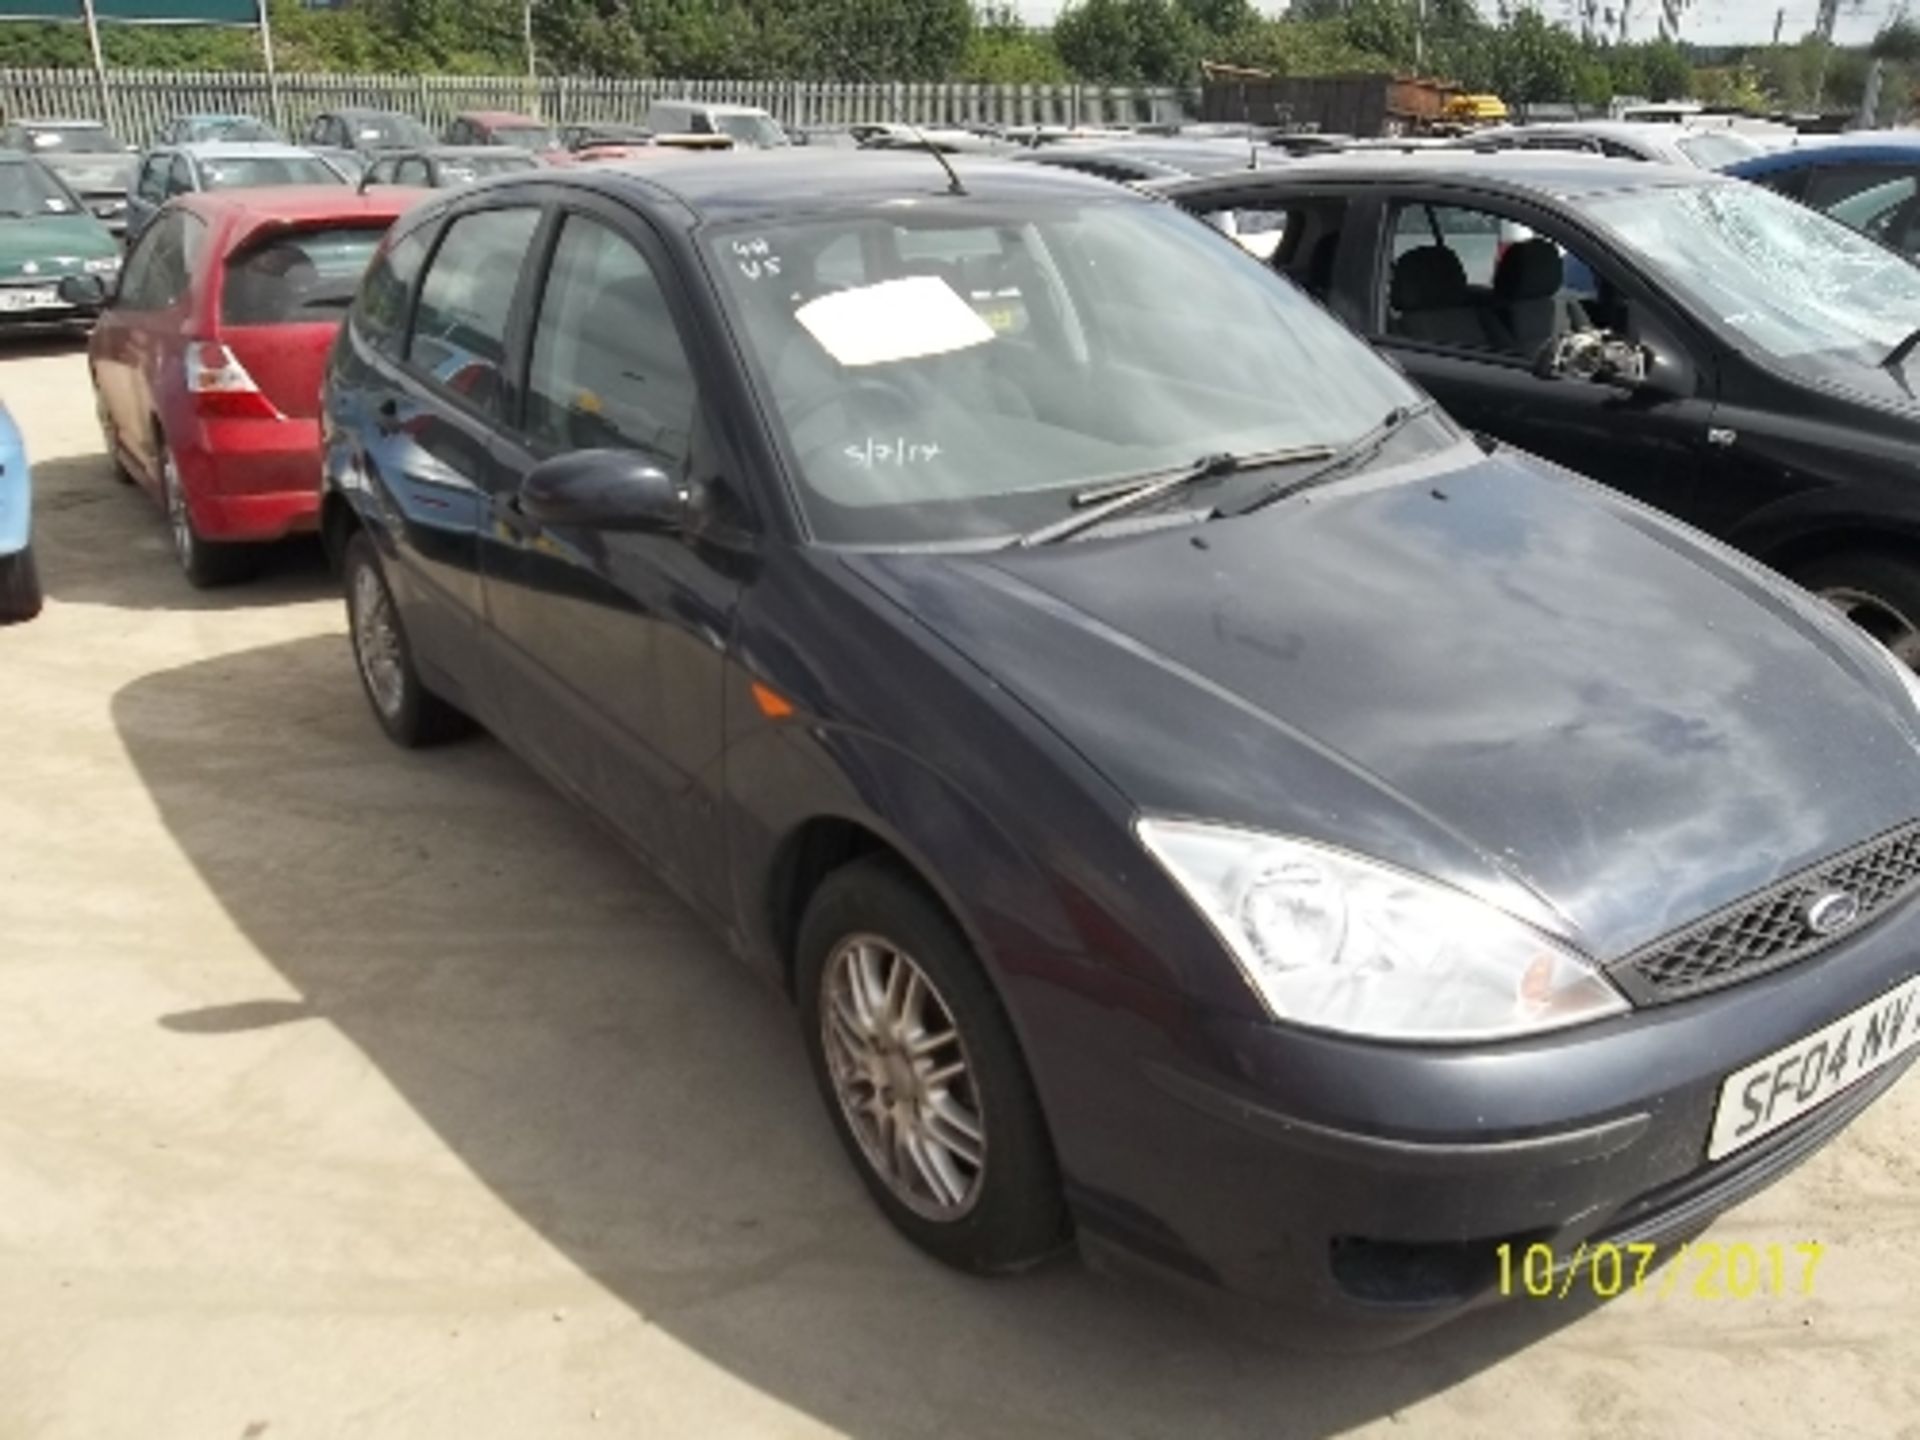 Ford Focus LX TD DI - SF04 NVT Date of registration: 01.08.2004 1753cc, diesel, manual, blue - Image 2 of 4